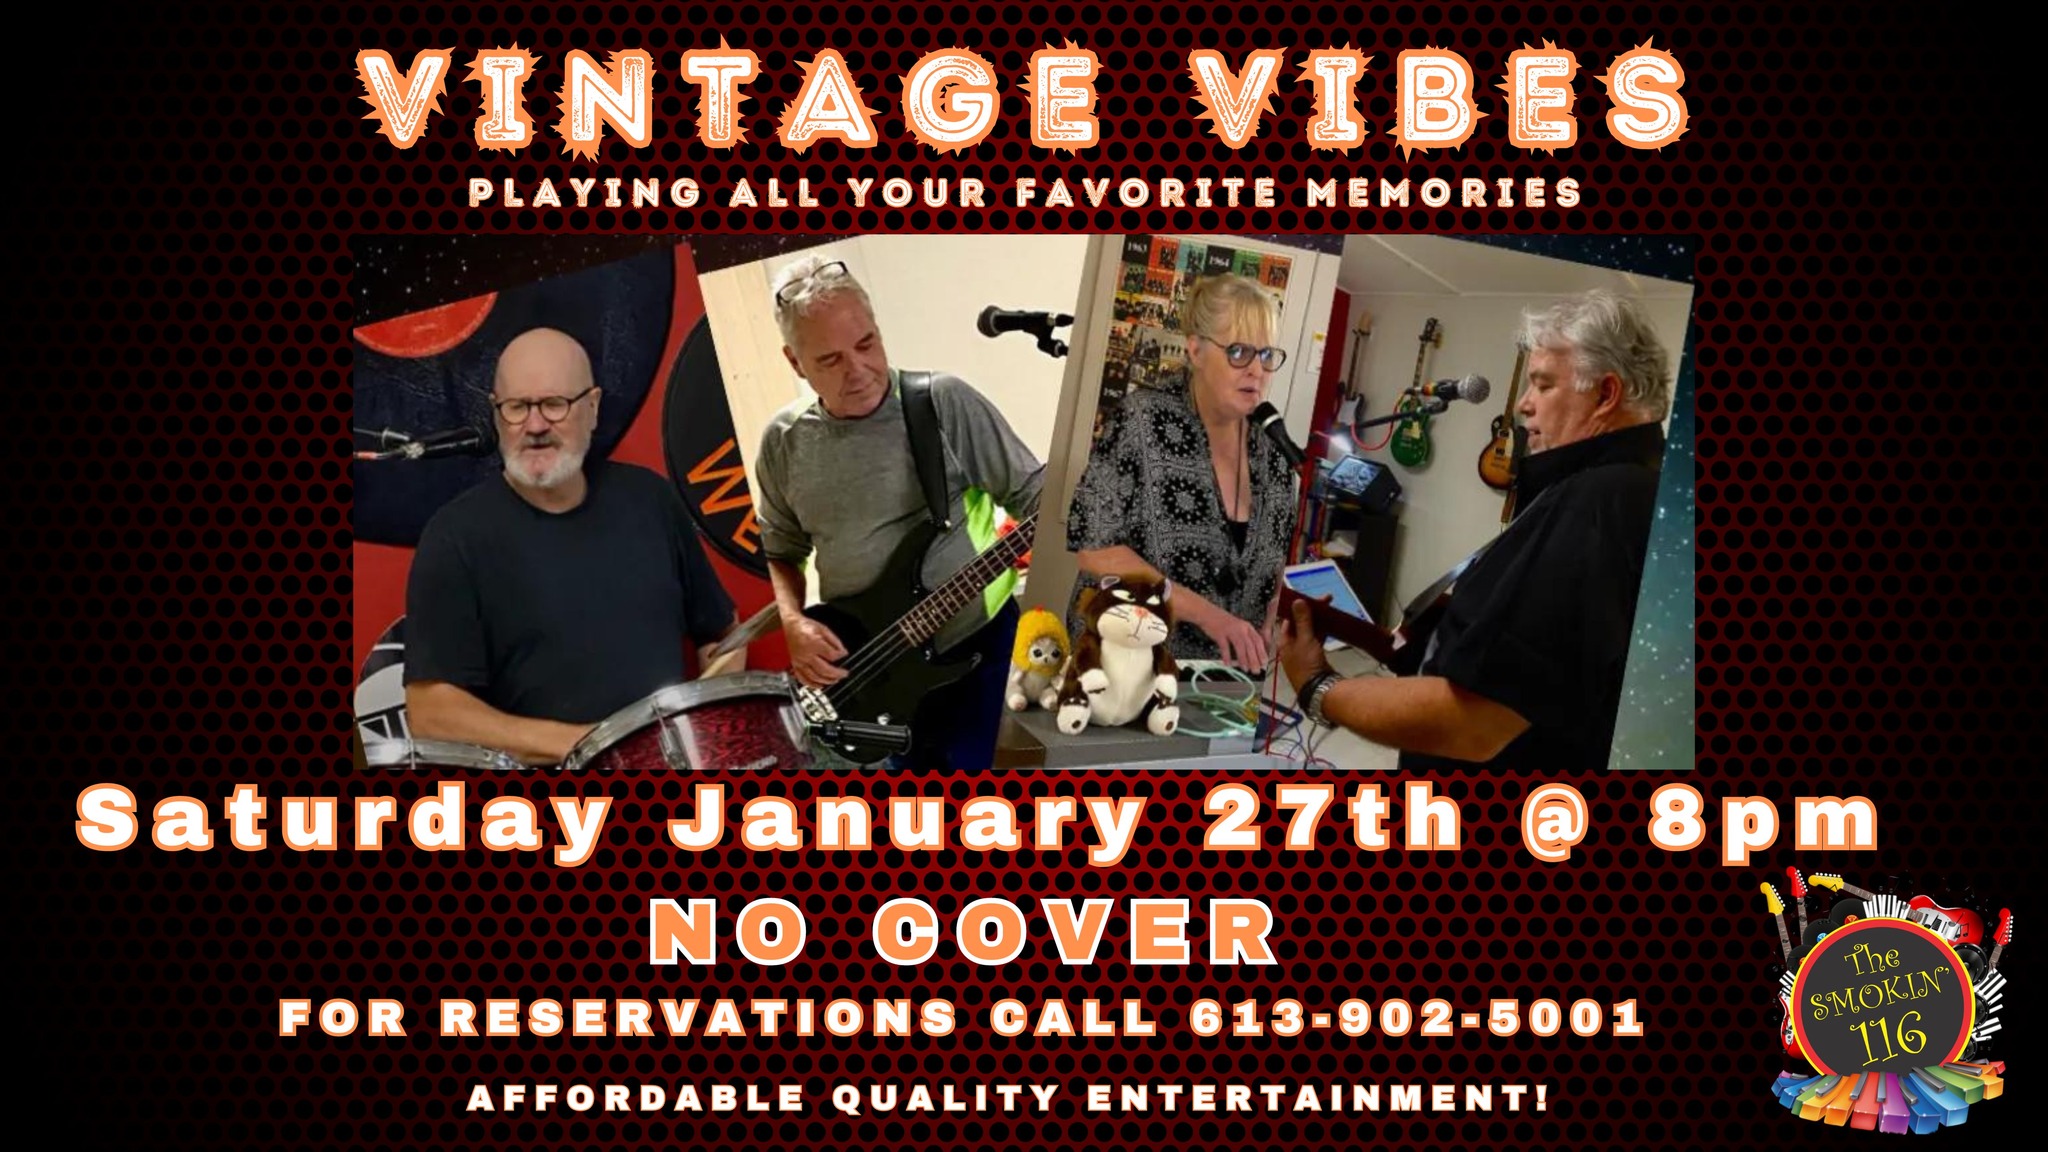 concert poster that shows the band in action. Title words include "Vintage Vibes" and "No Cover"